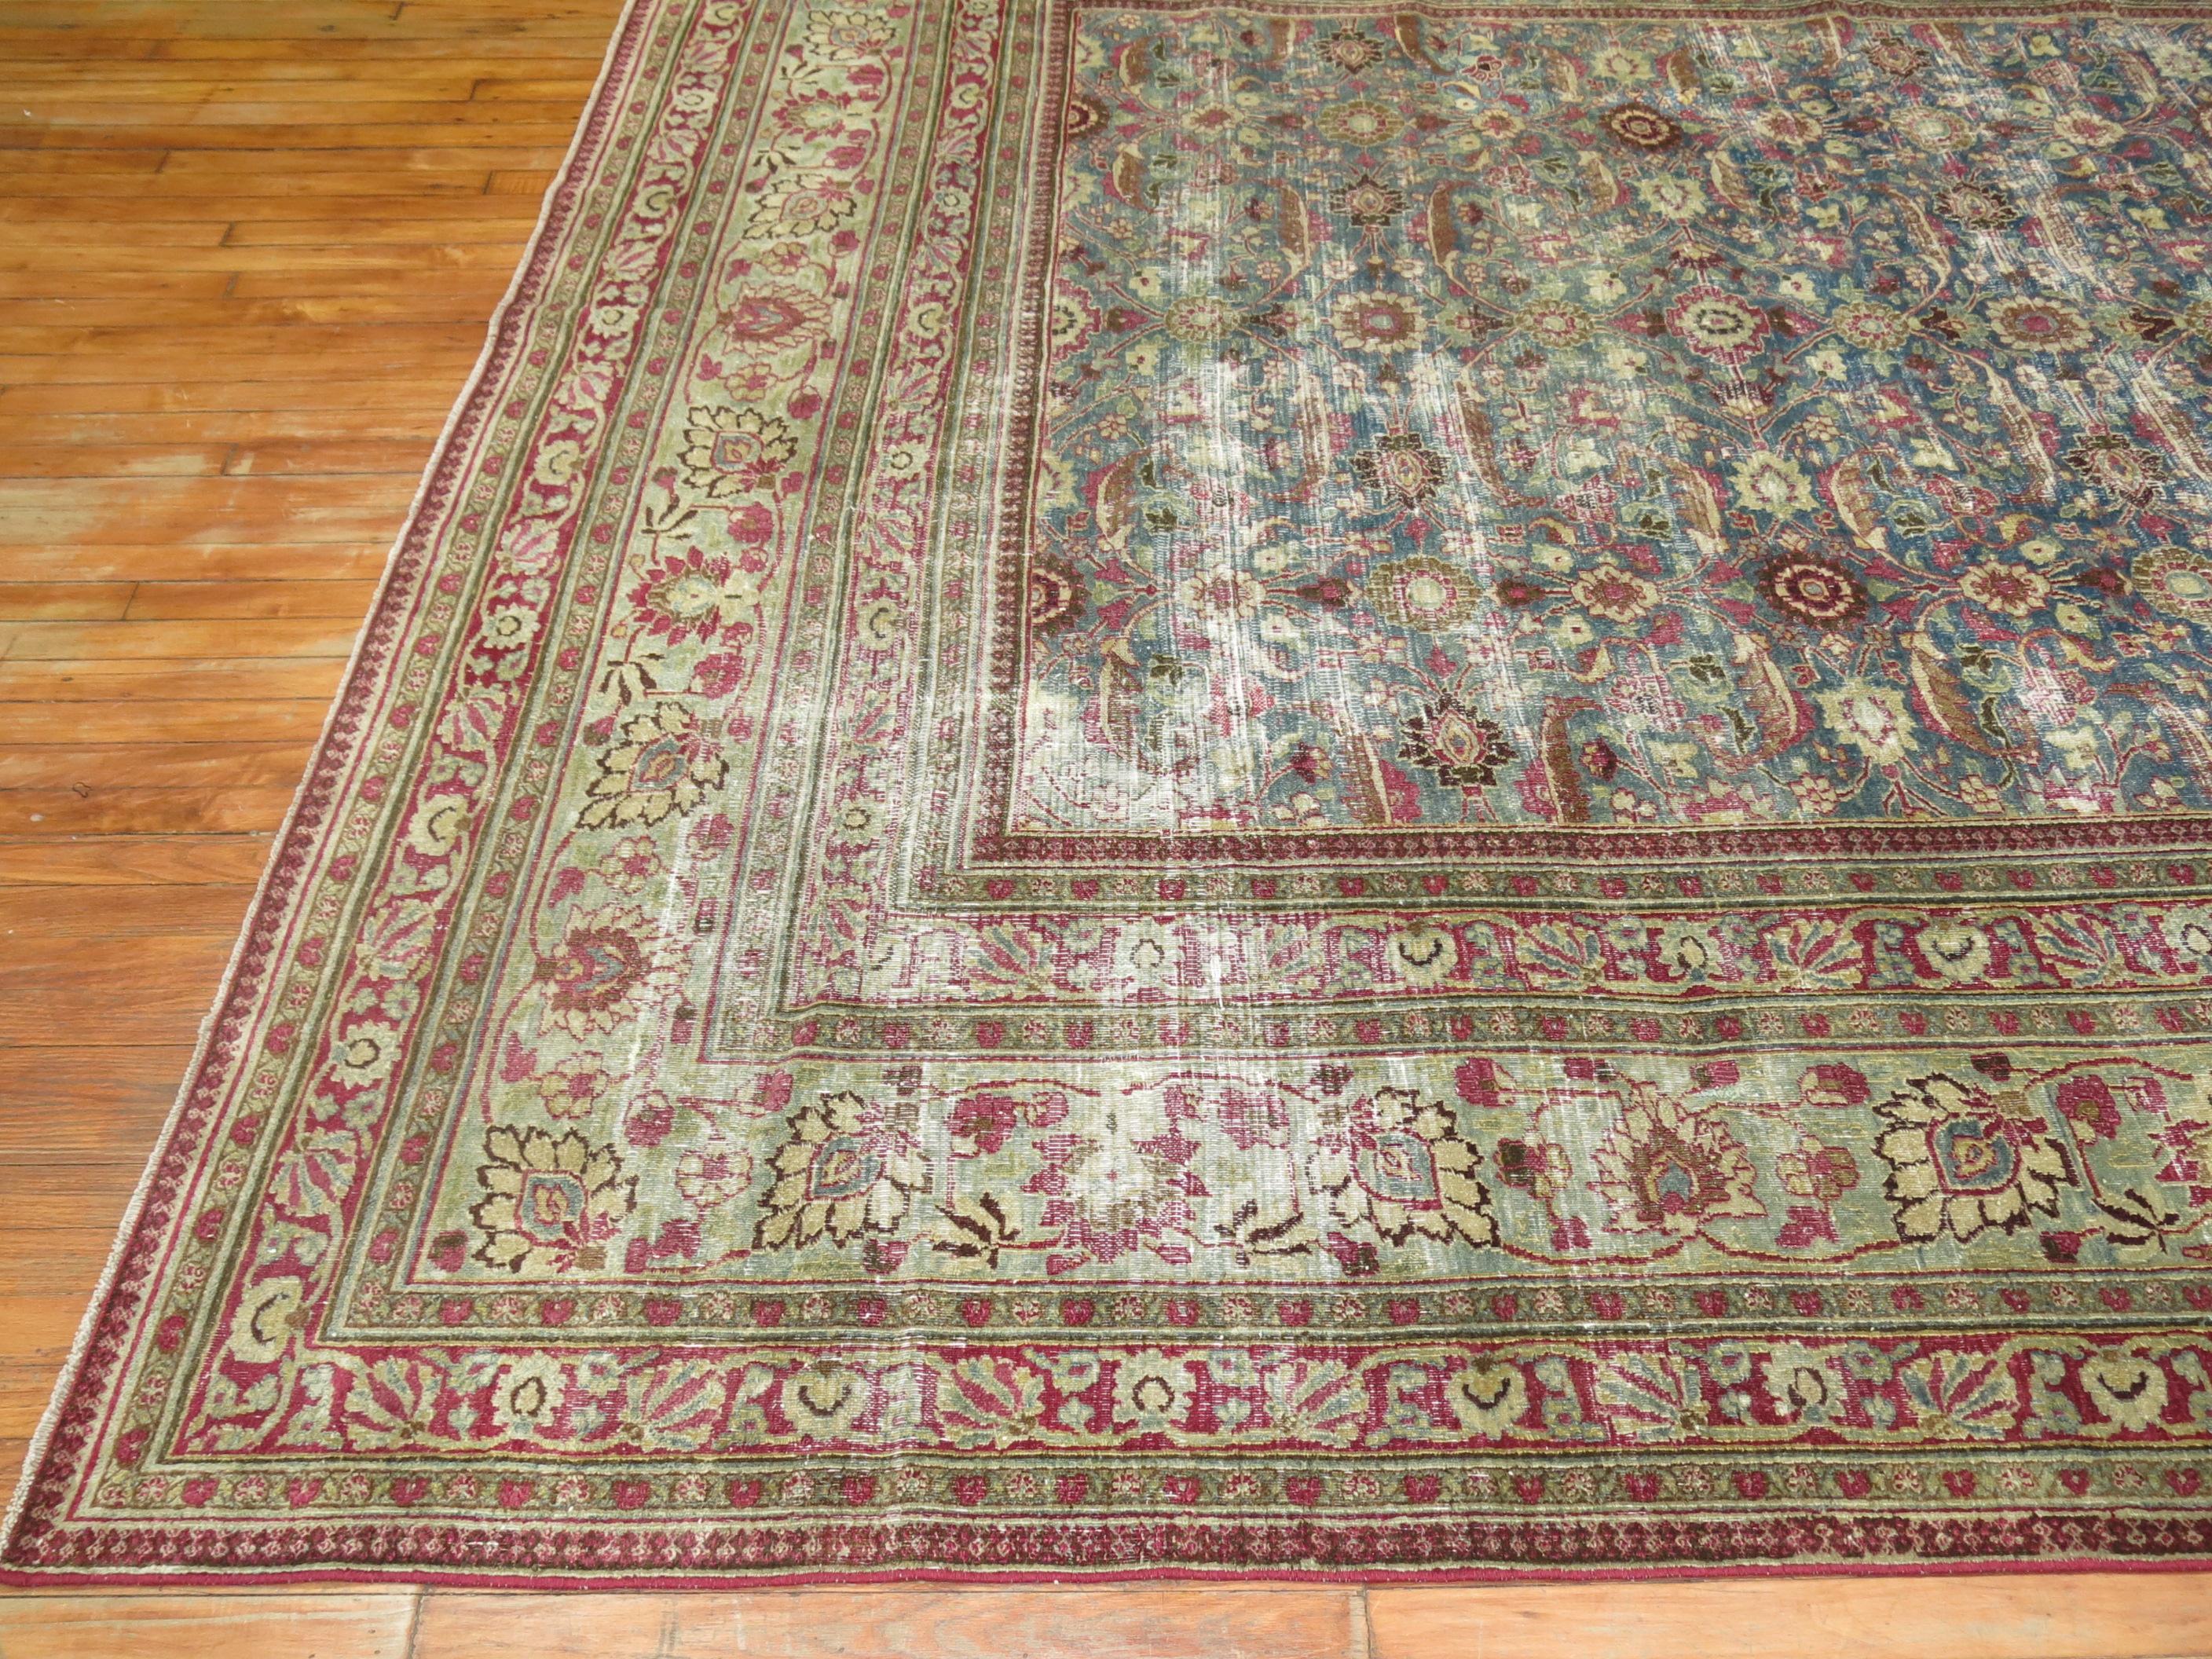 One of a kind shabby chic room size Persian rug from the meshed region. Predominantly blue and raspberry tones.